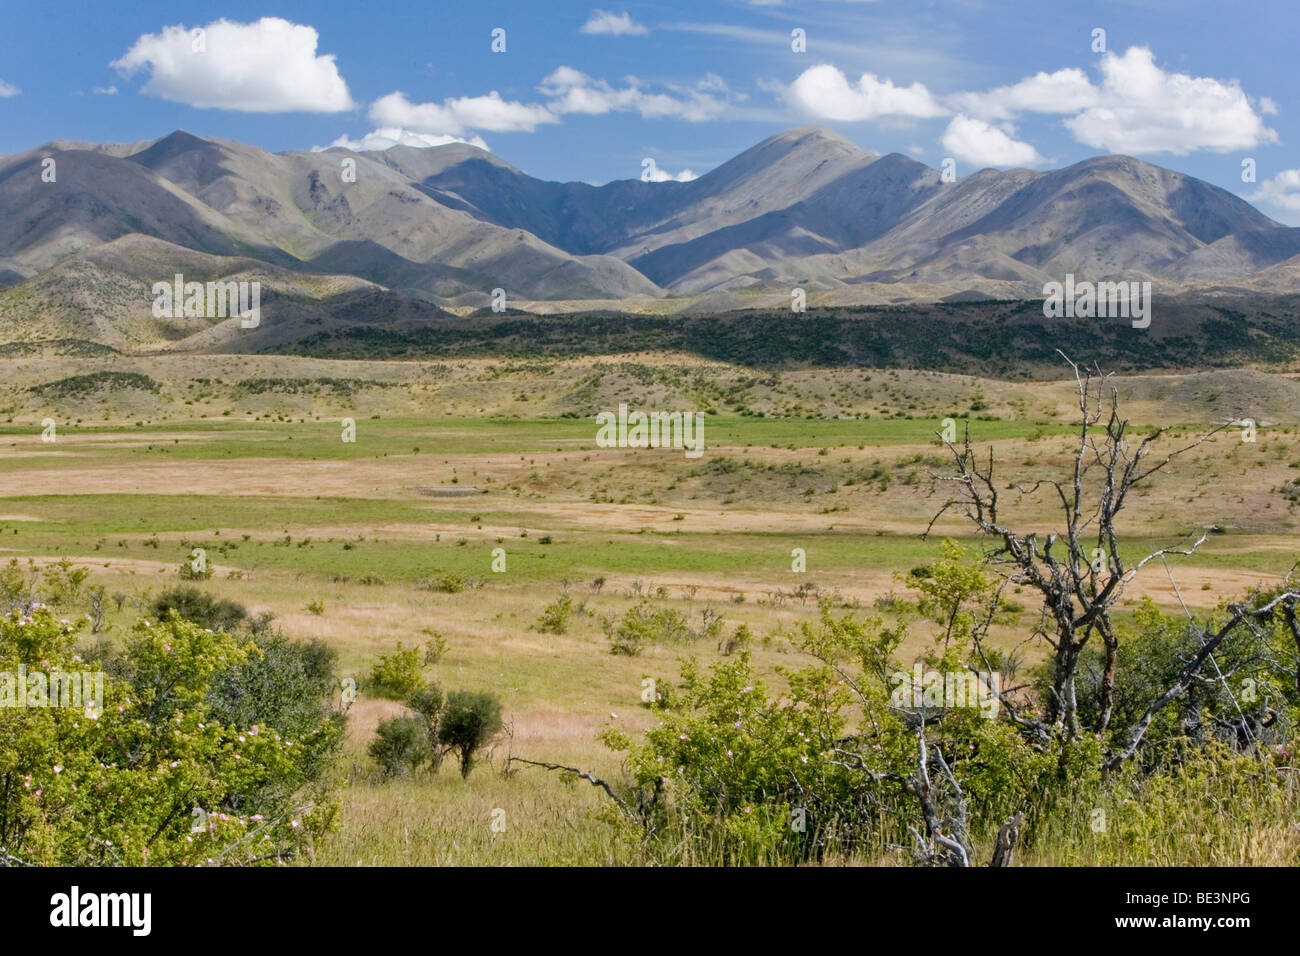 View over a grassy landscape on the mountains of the Rachel Range, Molesworth, South Island, New Zealand Stock Photo